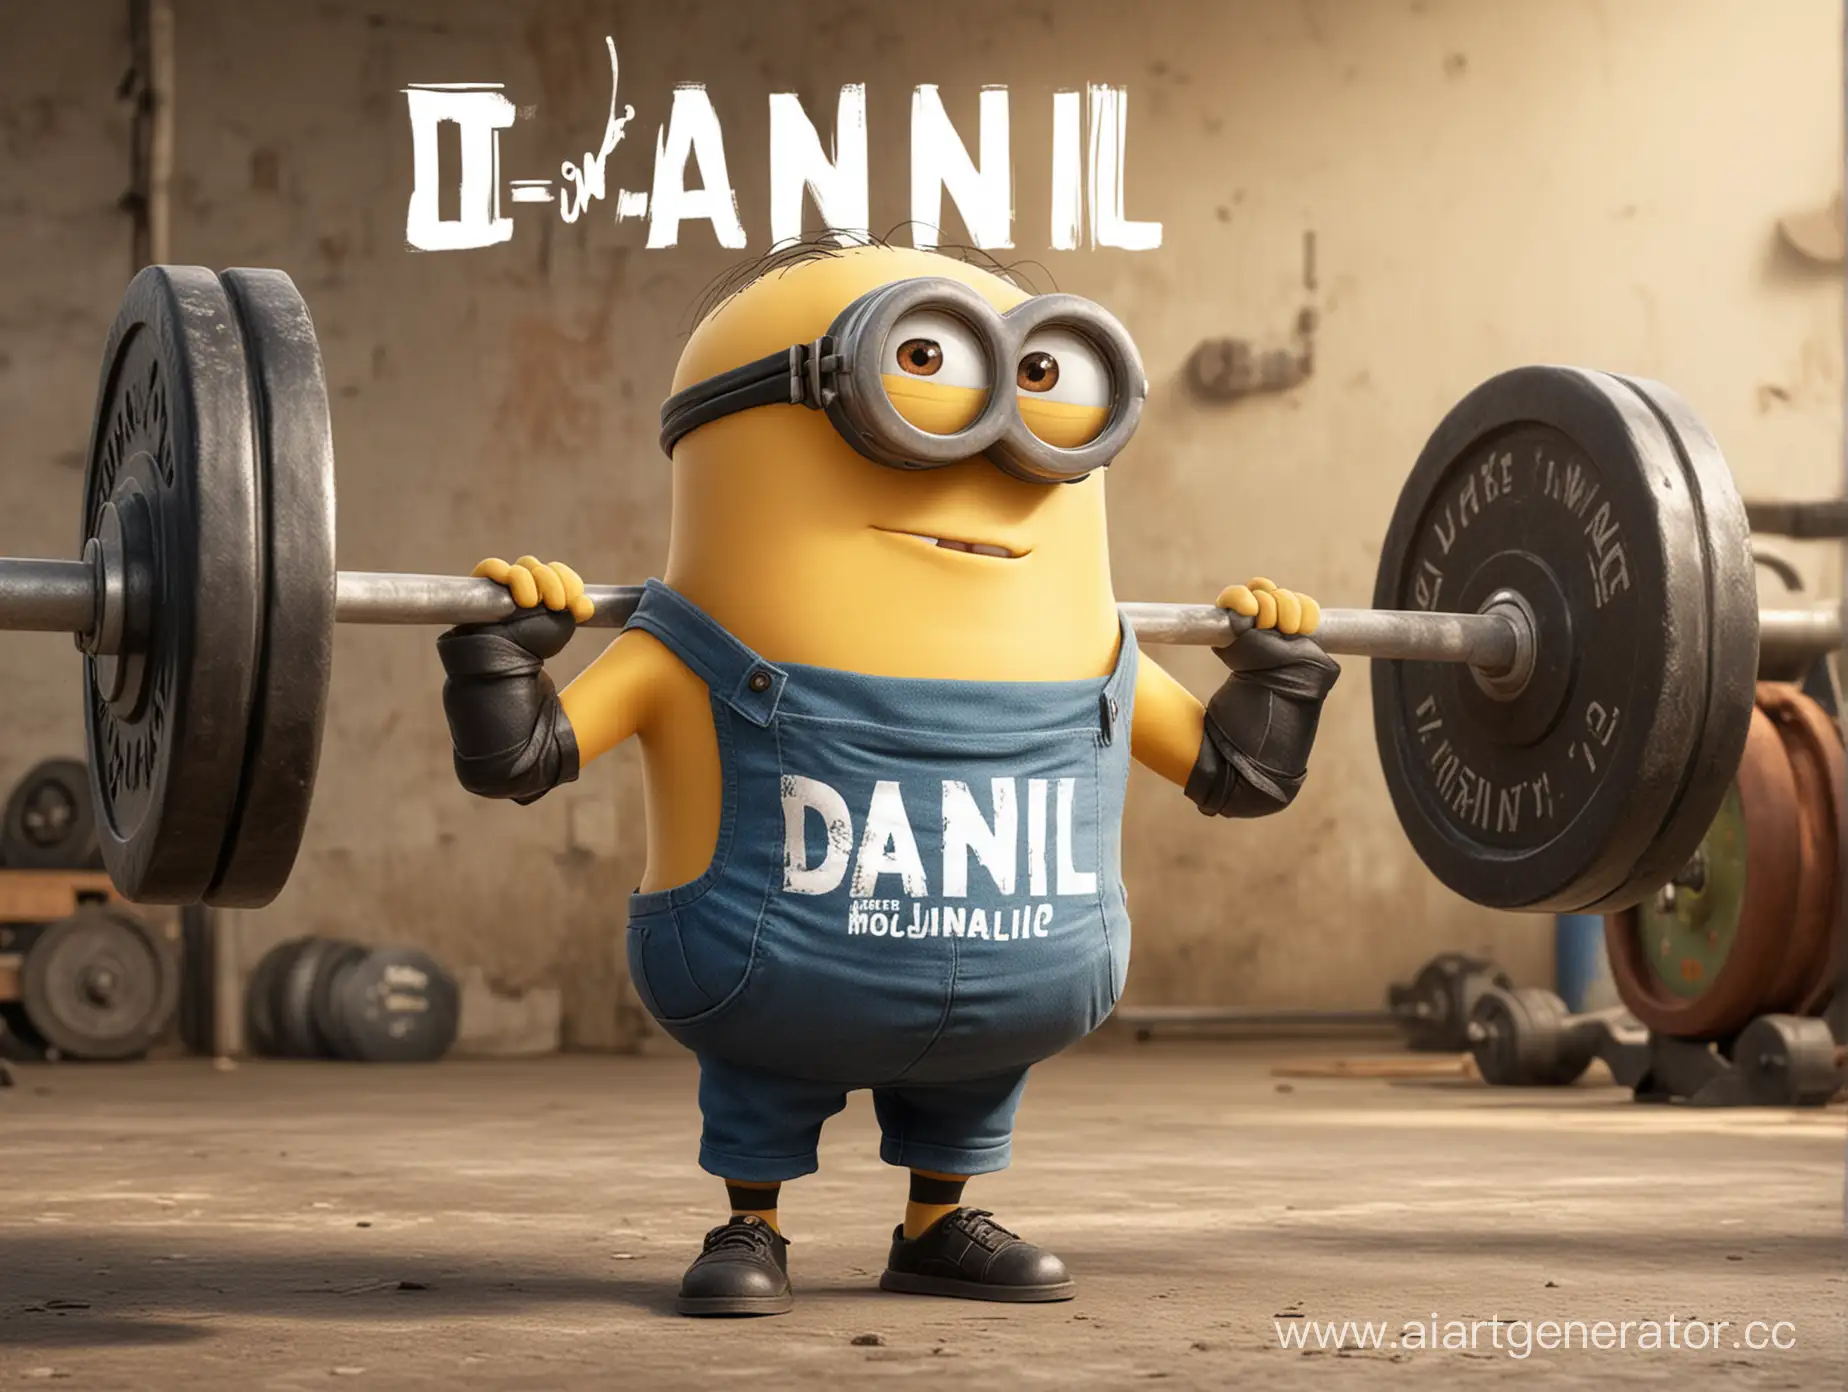 Strong-Minion-in-Danils-Tshirt-Lifting-Heavy-Barbell